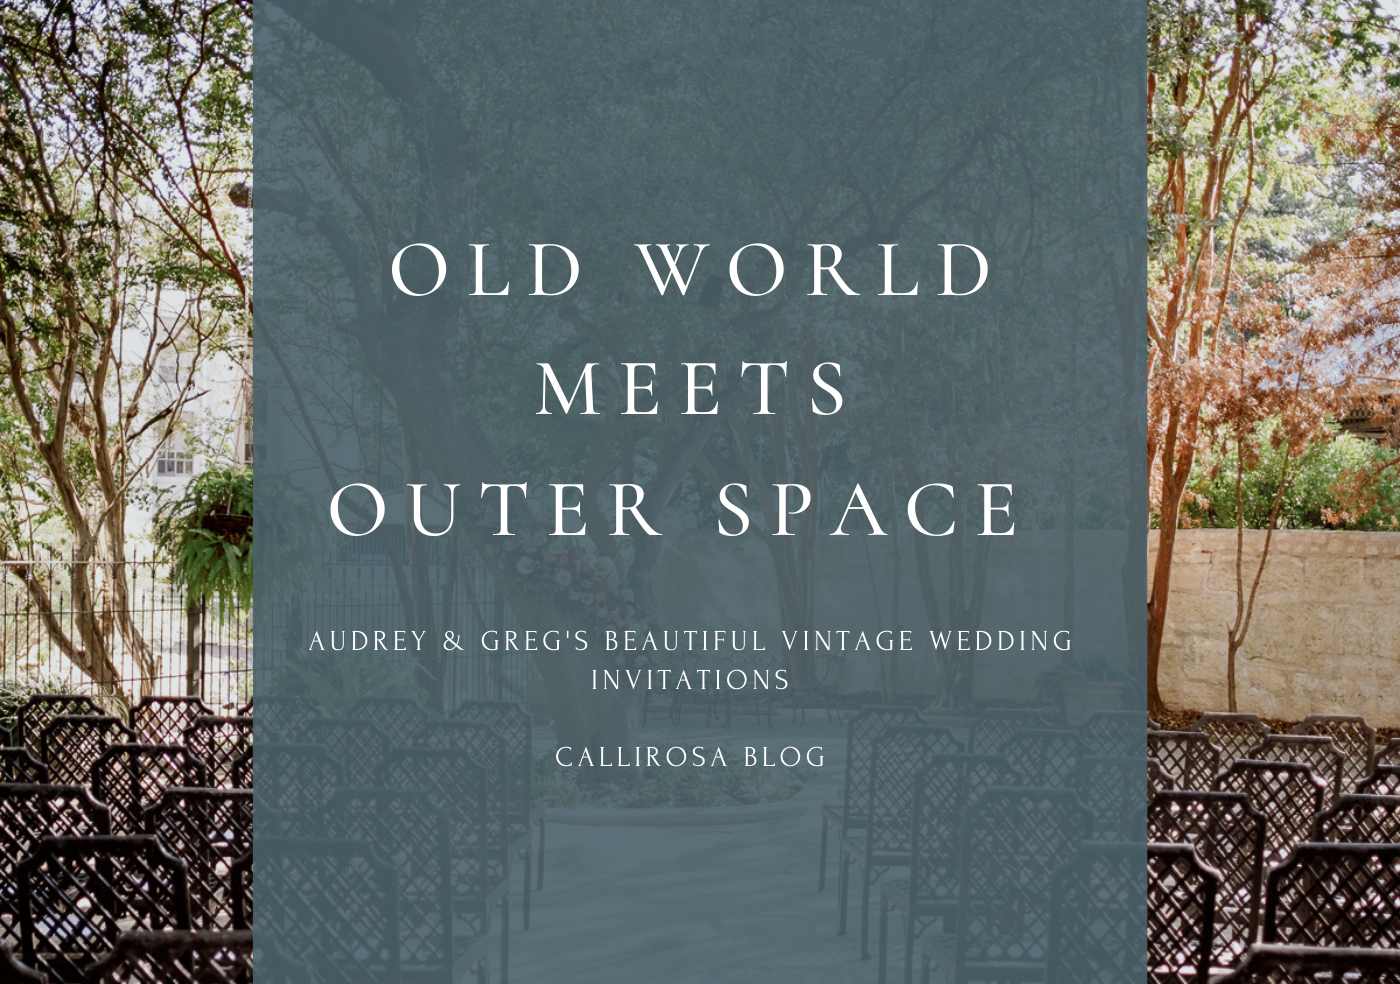 Old World Meets Outer Space VIntage Wedding Invitations by CalliRosa in San Antonio TX